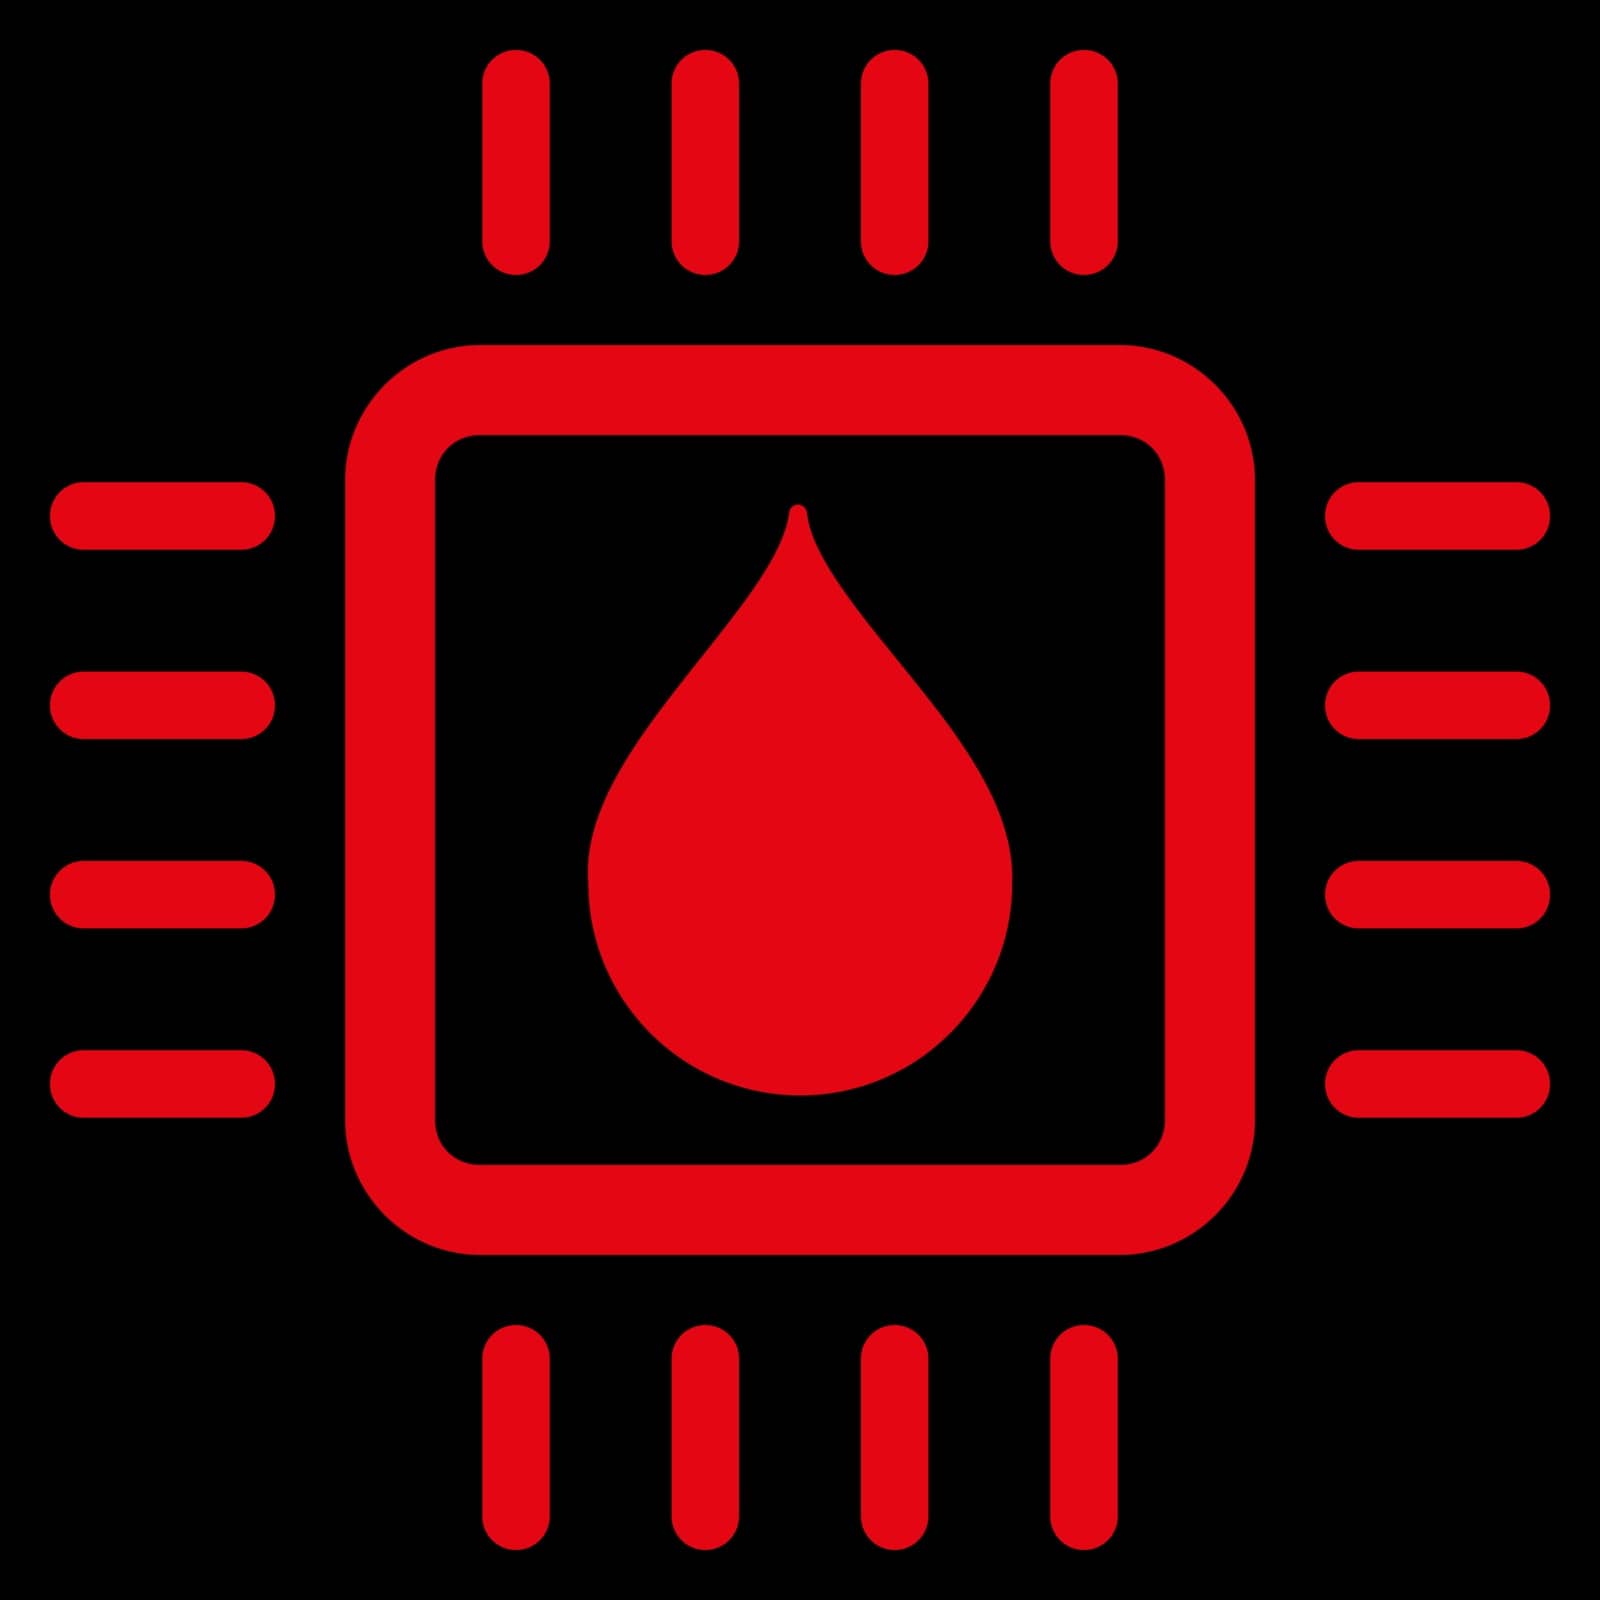 Drop Analysis Chip vector icon. Style is flat symbol, red color, rounded angles, black background.